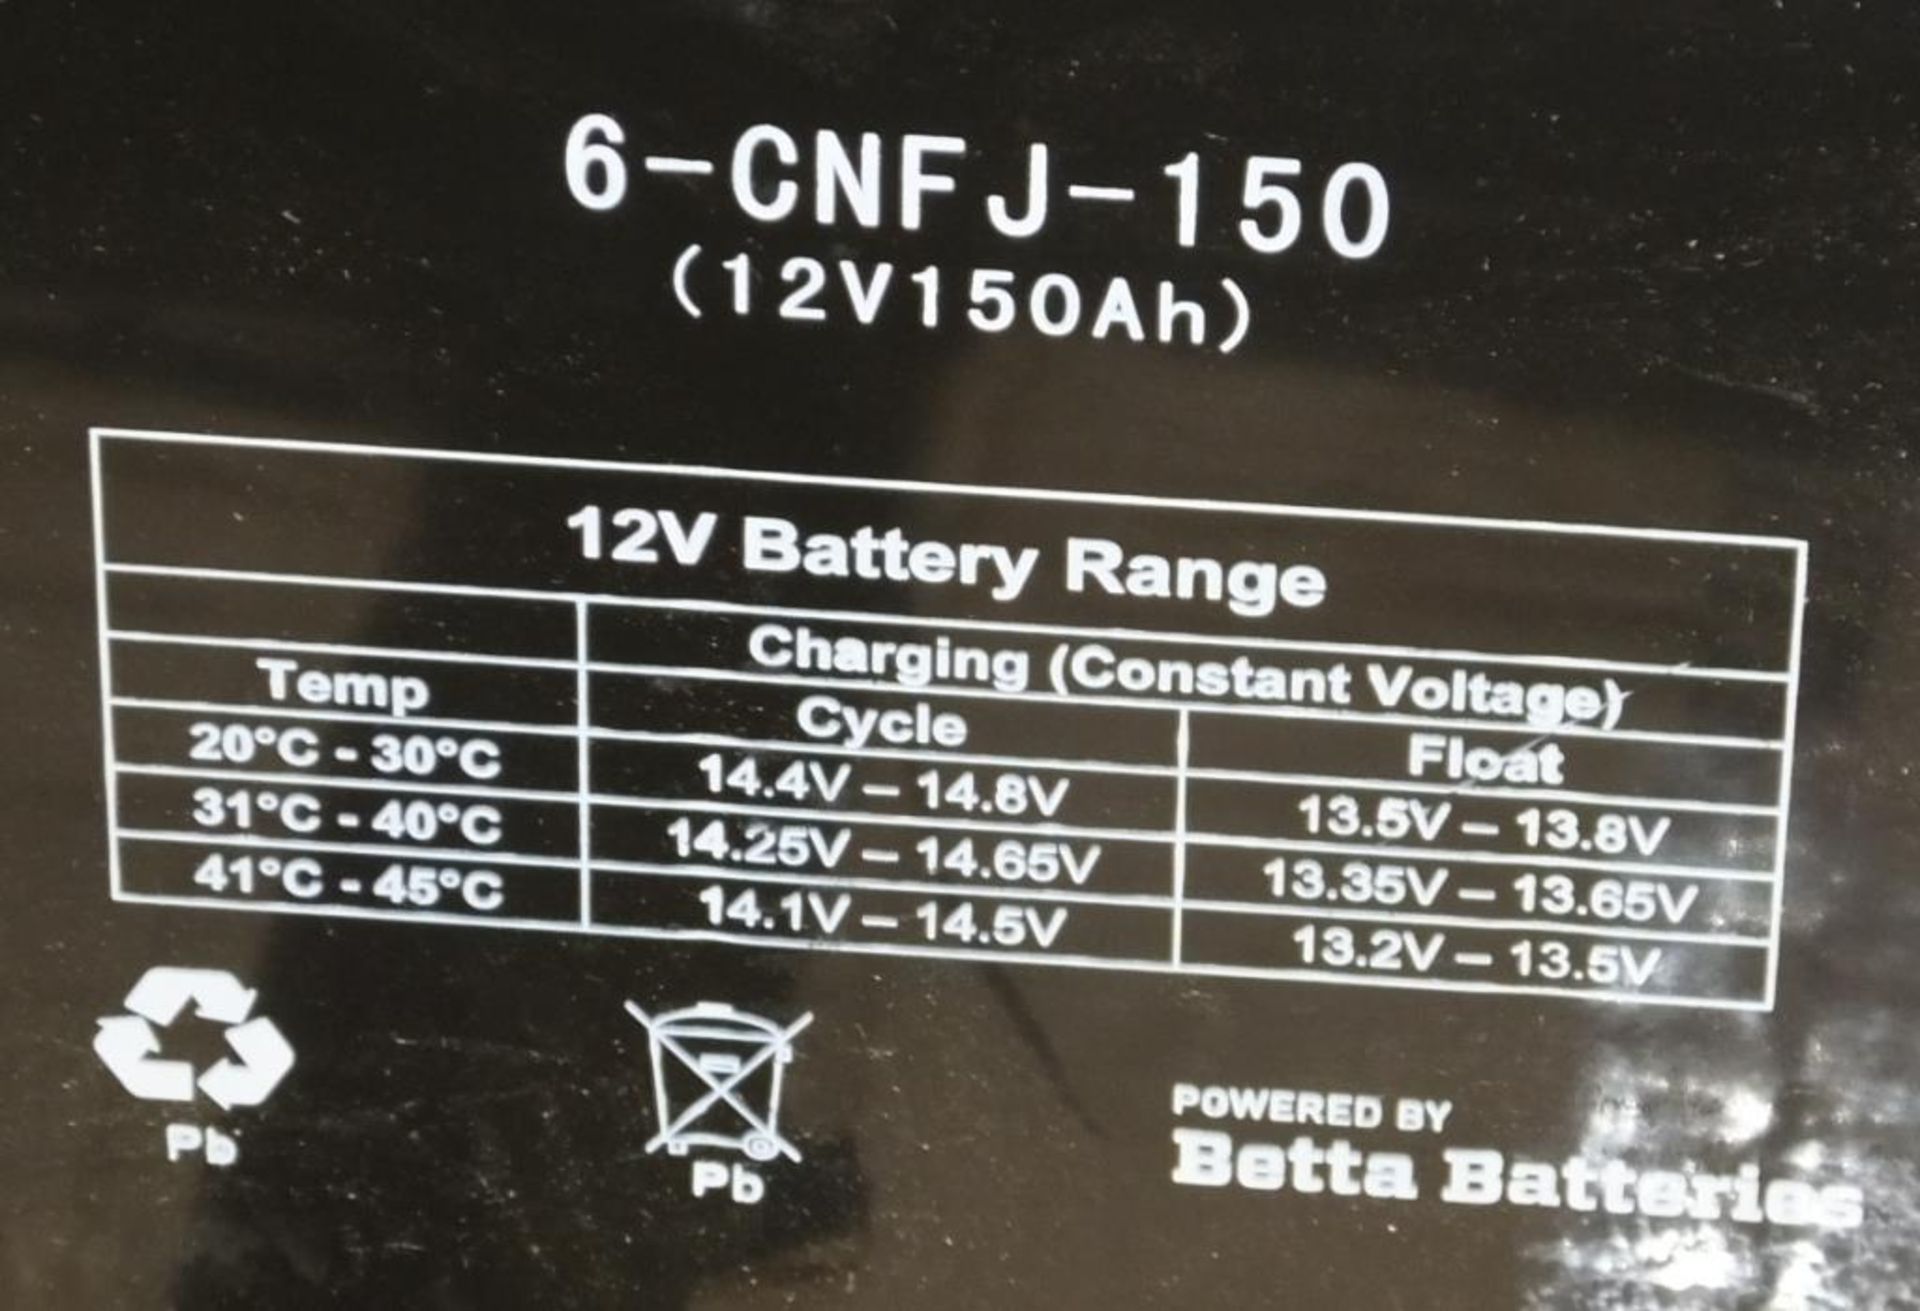 Betta Batteries Lead crystal battery 6-CNFT-150 - 12V 150Ah - 46kg (untested) - Image 4 of 4